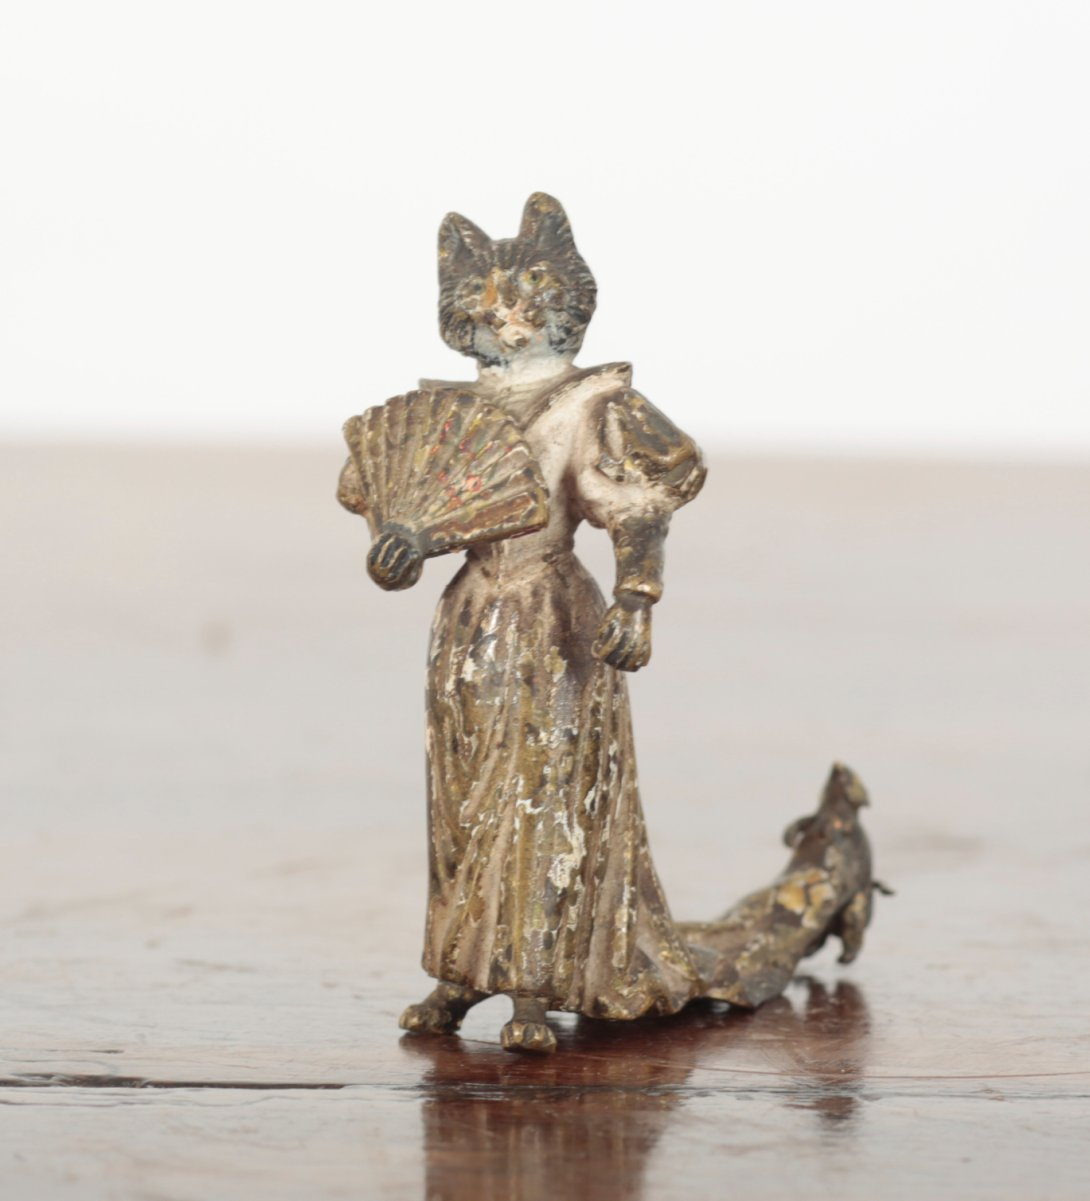 AN AUSTRIAN COLD PAINTED BRONZE FIGURE OF A CAT - Image 2 of 3